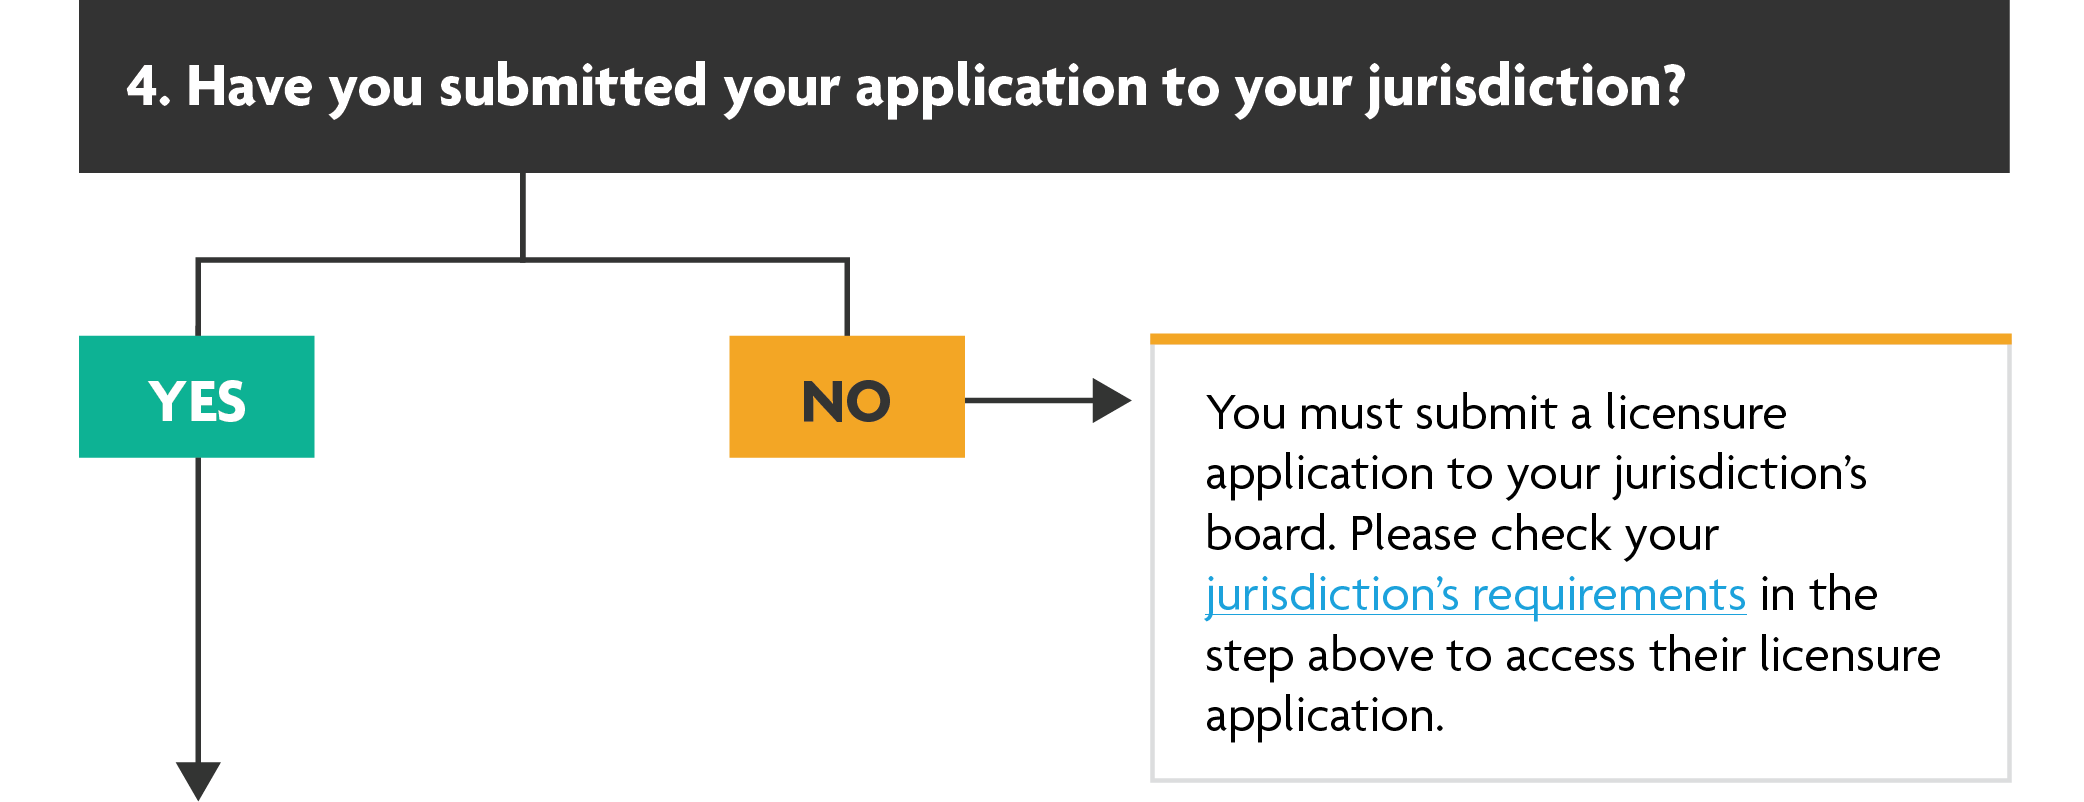 Question 4: Have you submitted your application to your jurisdiction? If yes: Move to the next step. If no: You must submit a licensure application to your jurisdiction’s board. Please check your jurisdiction’s requirements in the step above to access their licensure application.